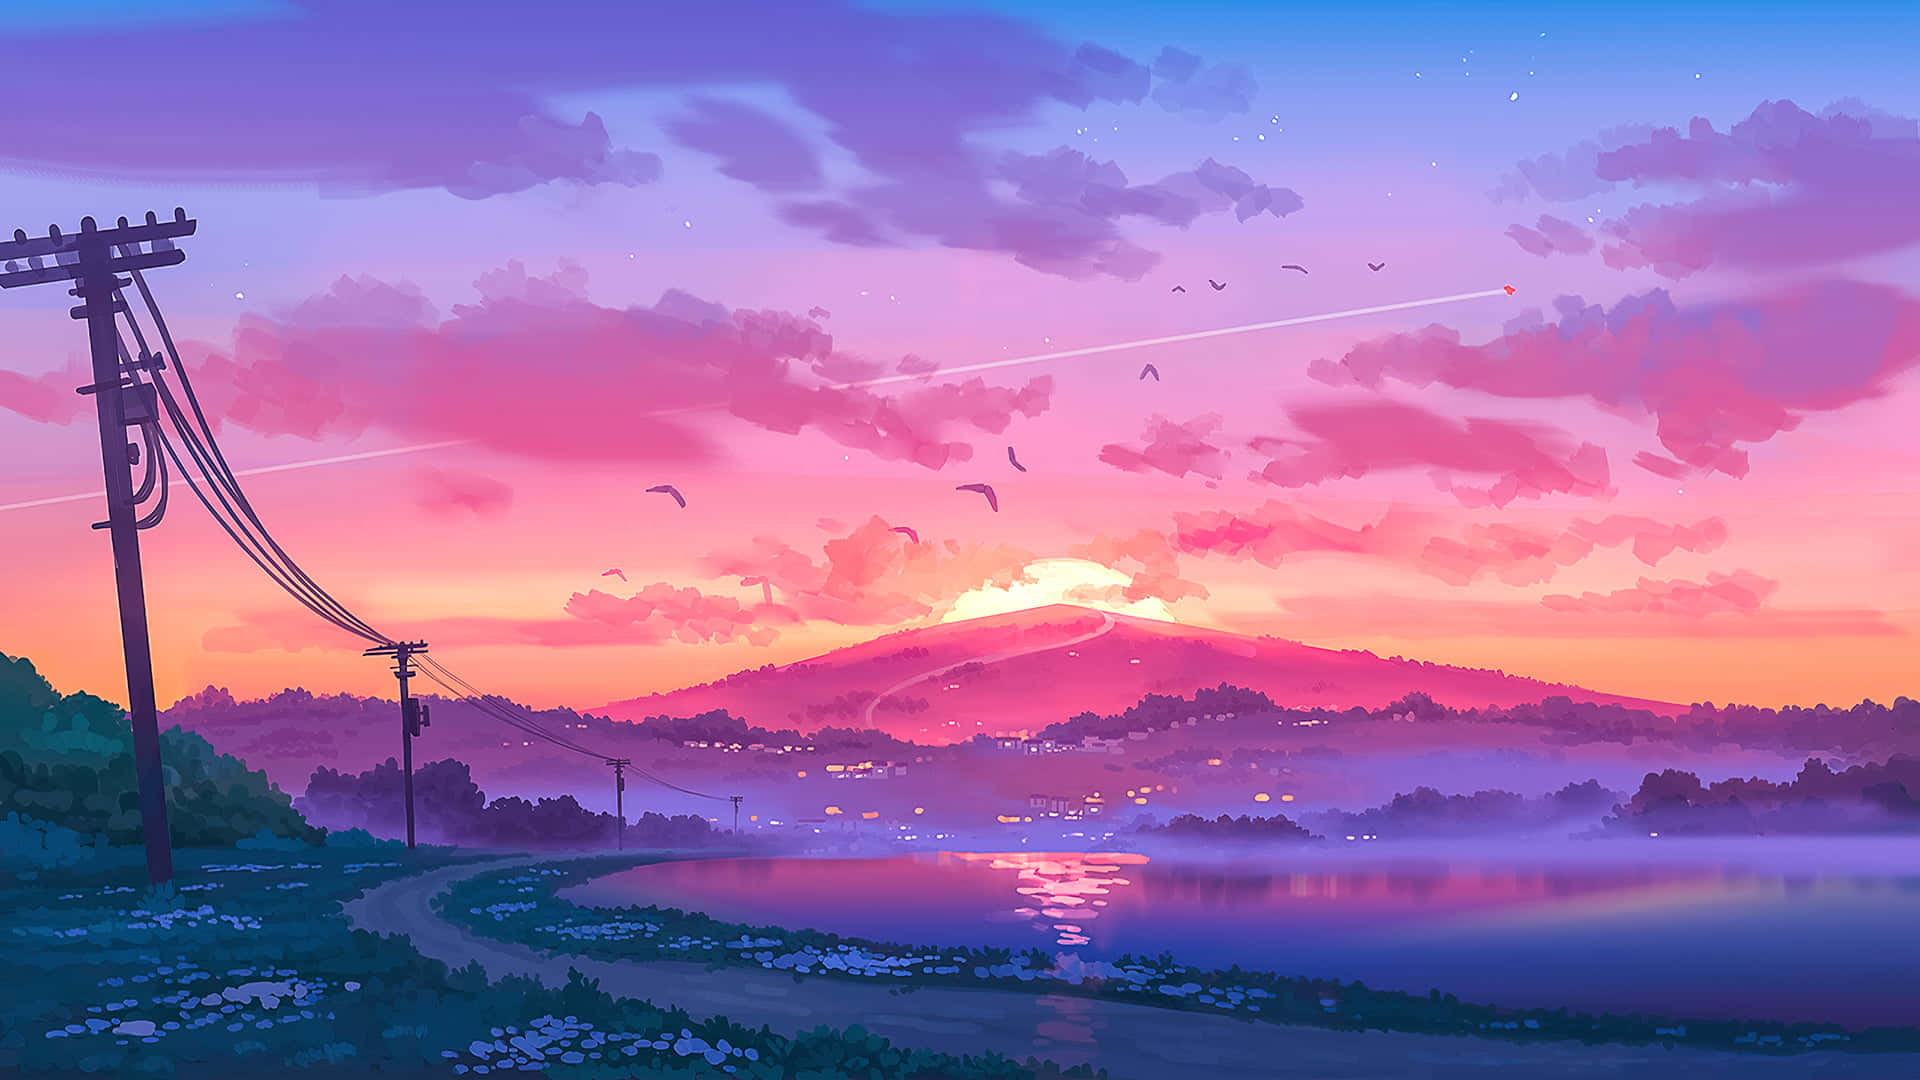 "An abstract pixel-based landscape illuminated by a bright morning light" Wallpaper